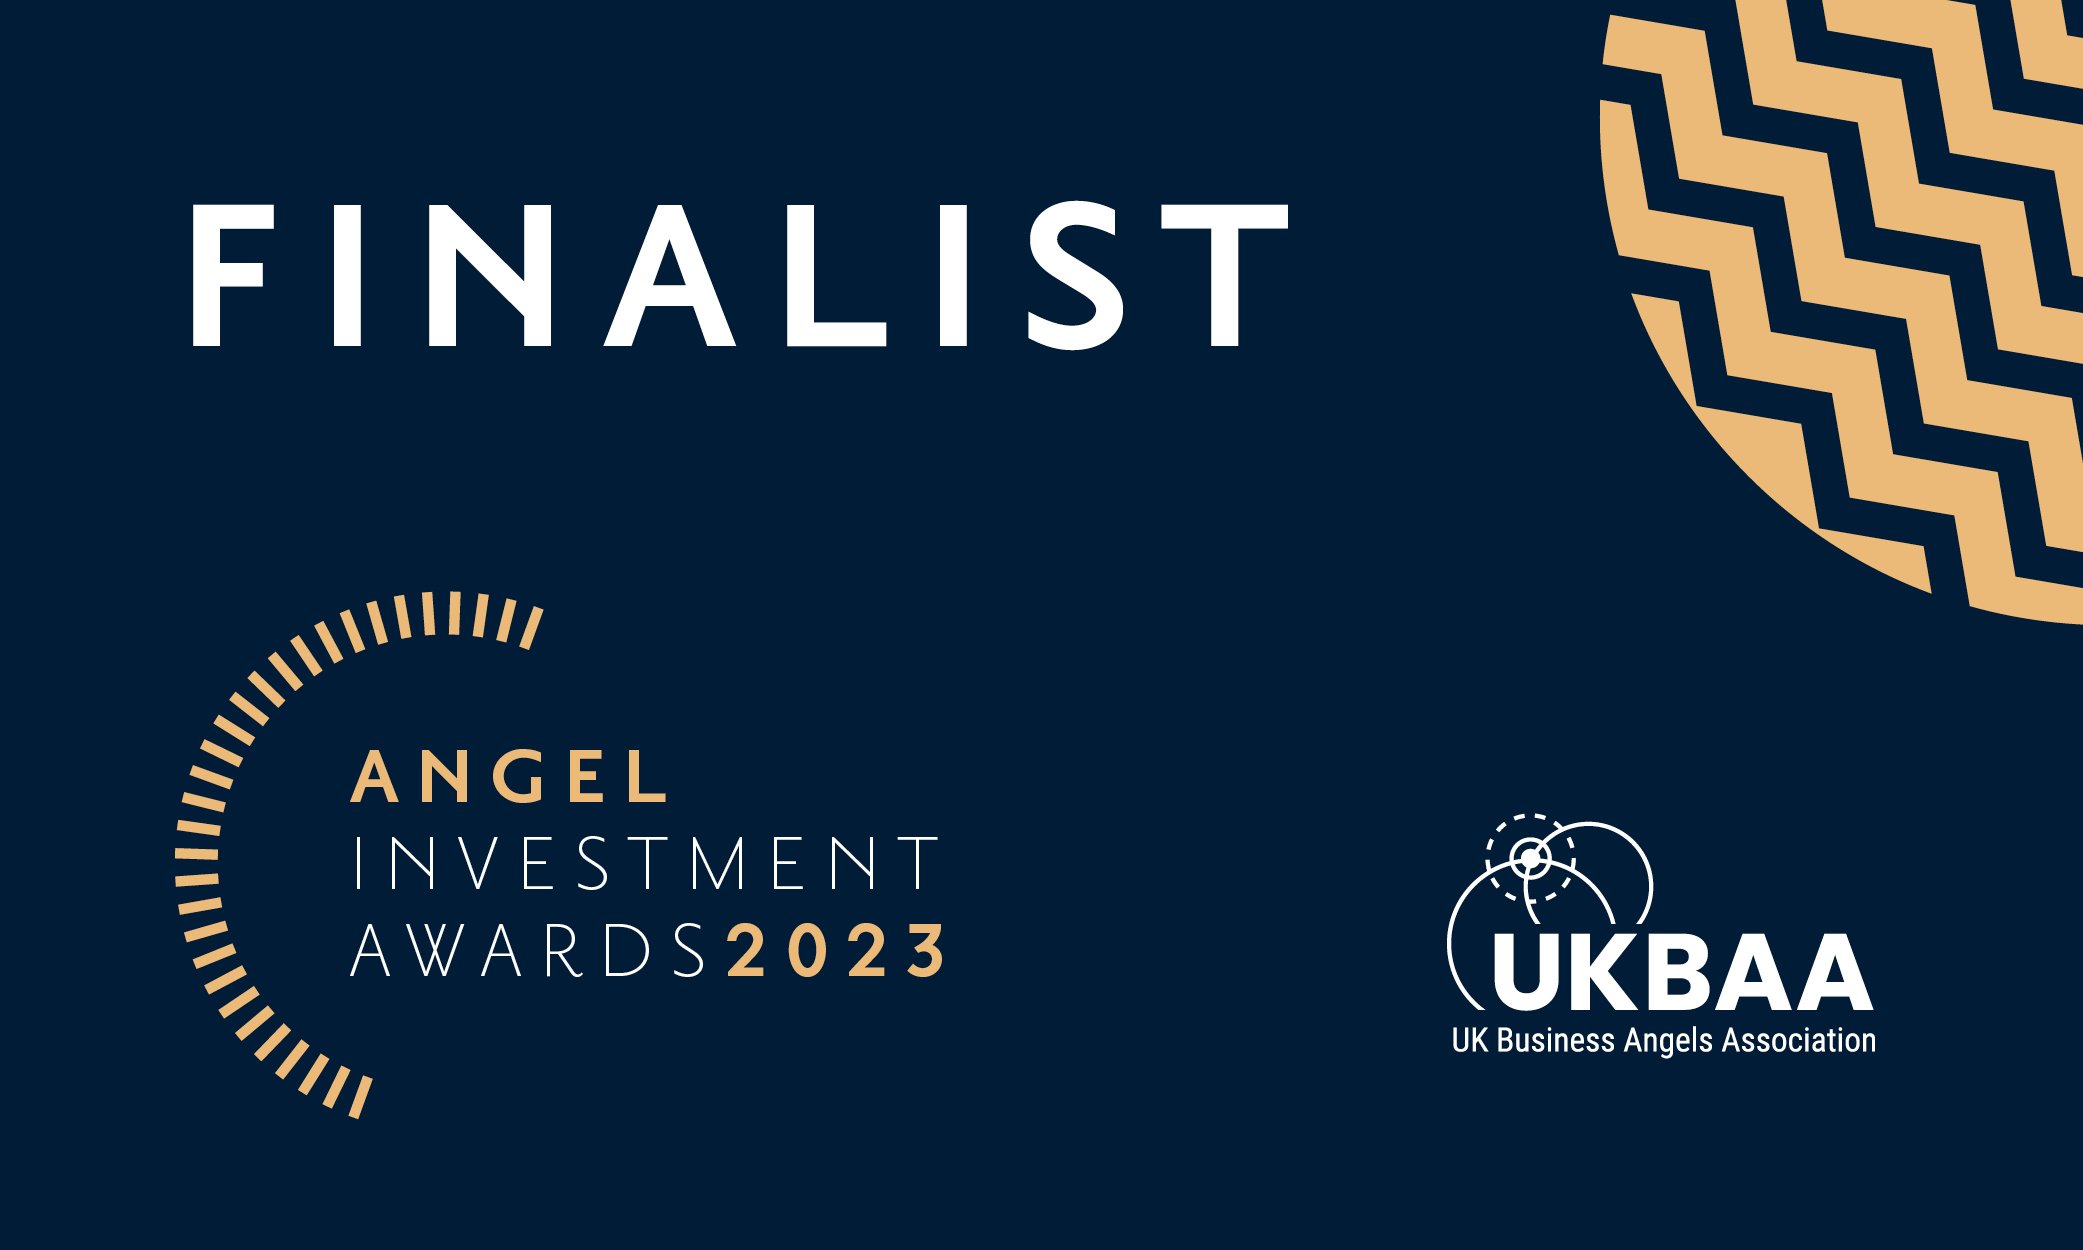 Twig is a finalist for the UKBAA Deep Tech Investment of the Year